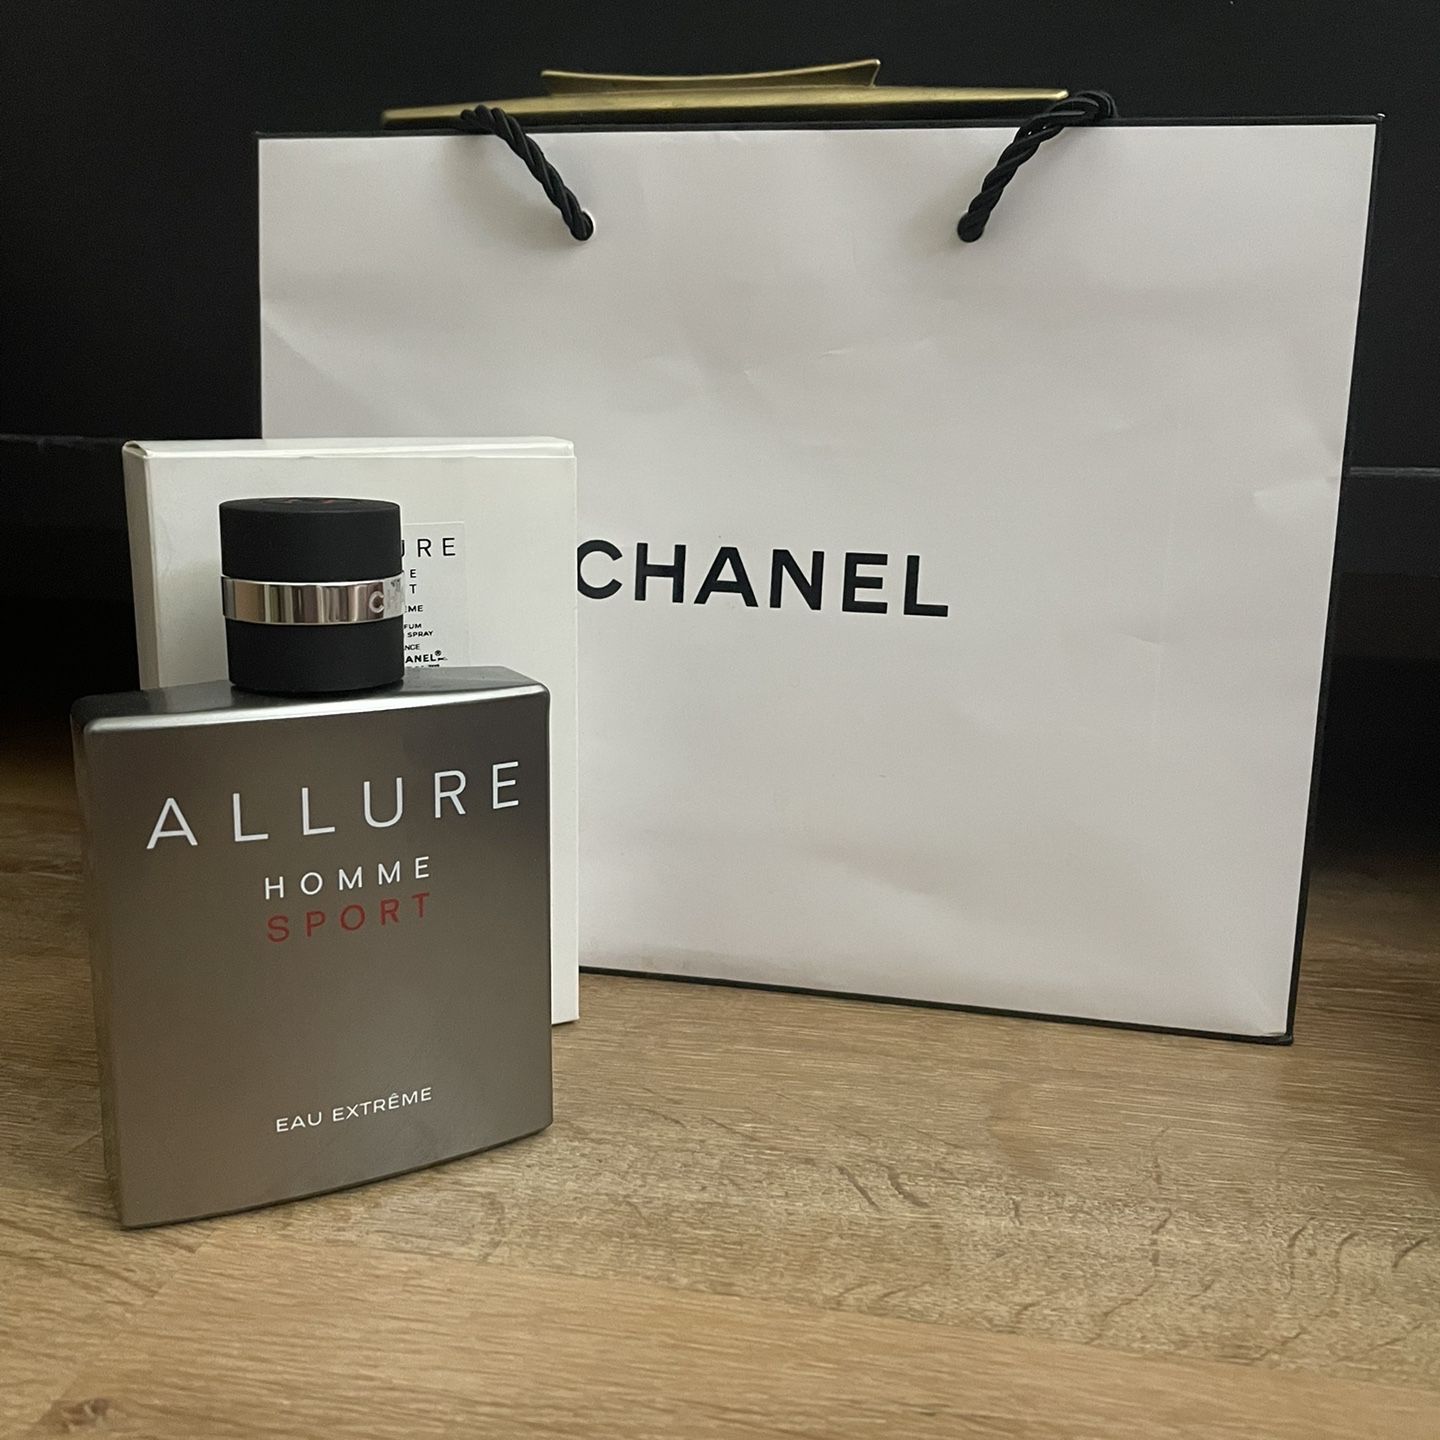 Chanel Allure Homme Sport Extreme 100ml for Sale in Hollywood